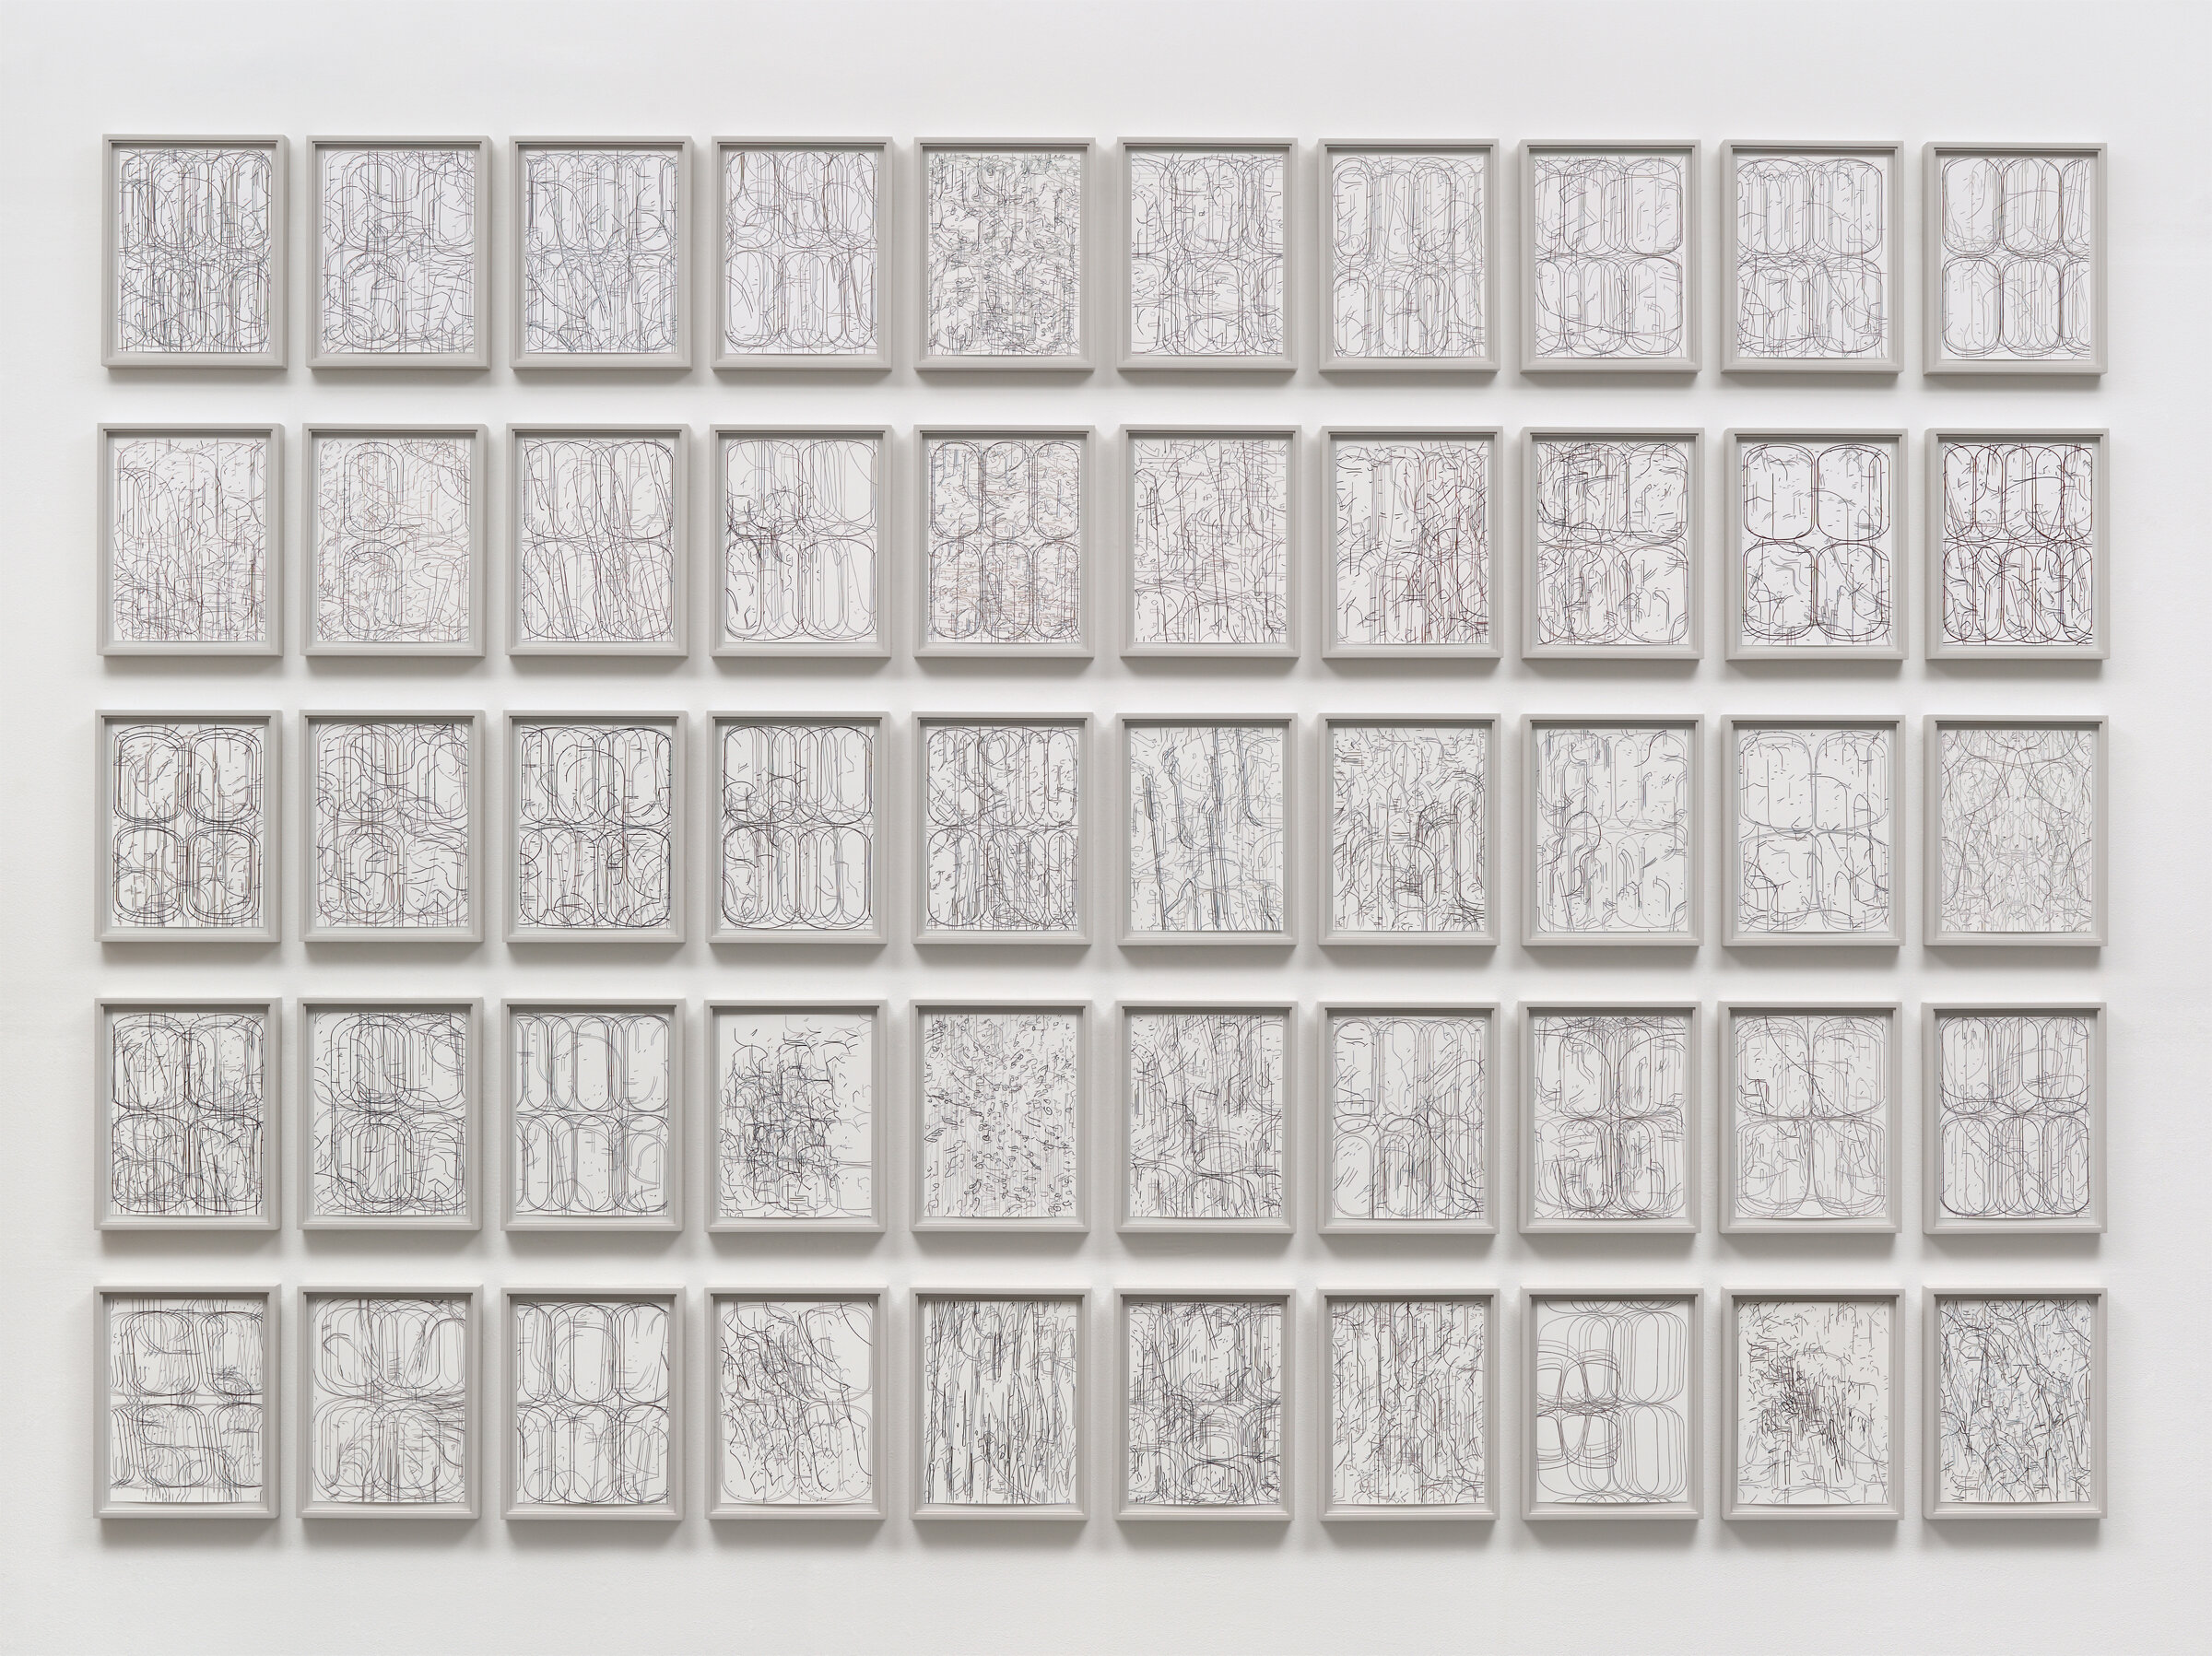  [installation]  50 Variations,  2011 Gouache on Rising Stonehenge paper Each 12 x 9 inches (13 ¾ x 10 ¾ inches framed) Overall dimensions variable 